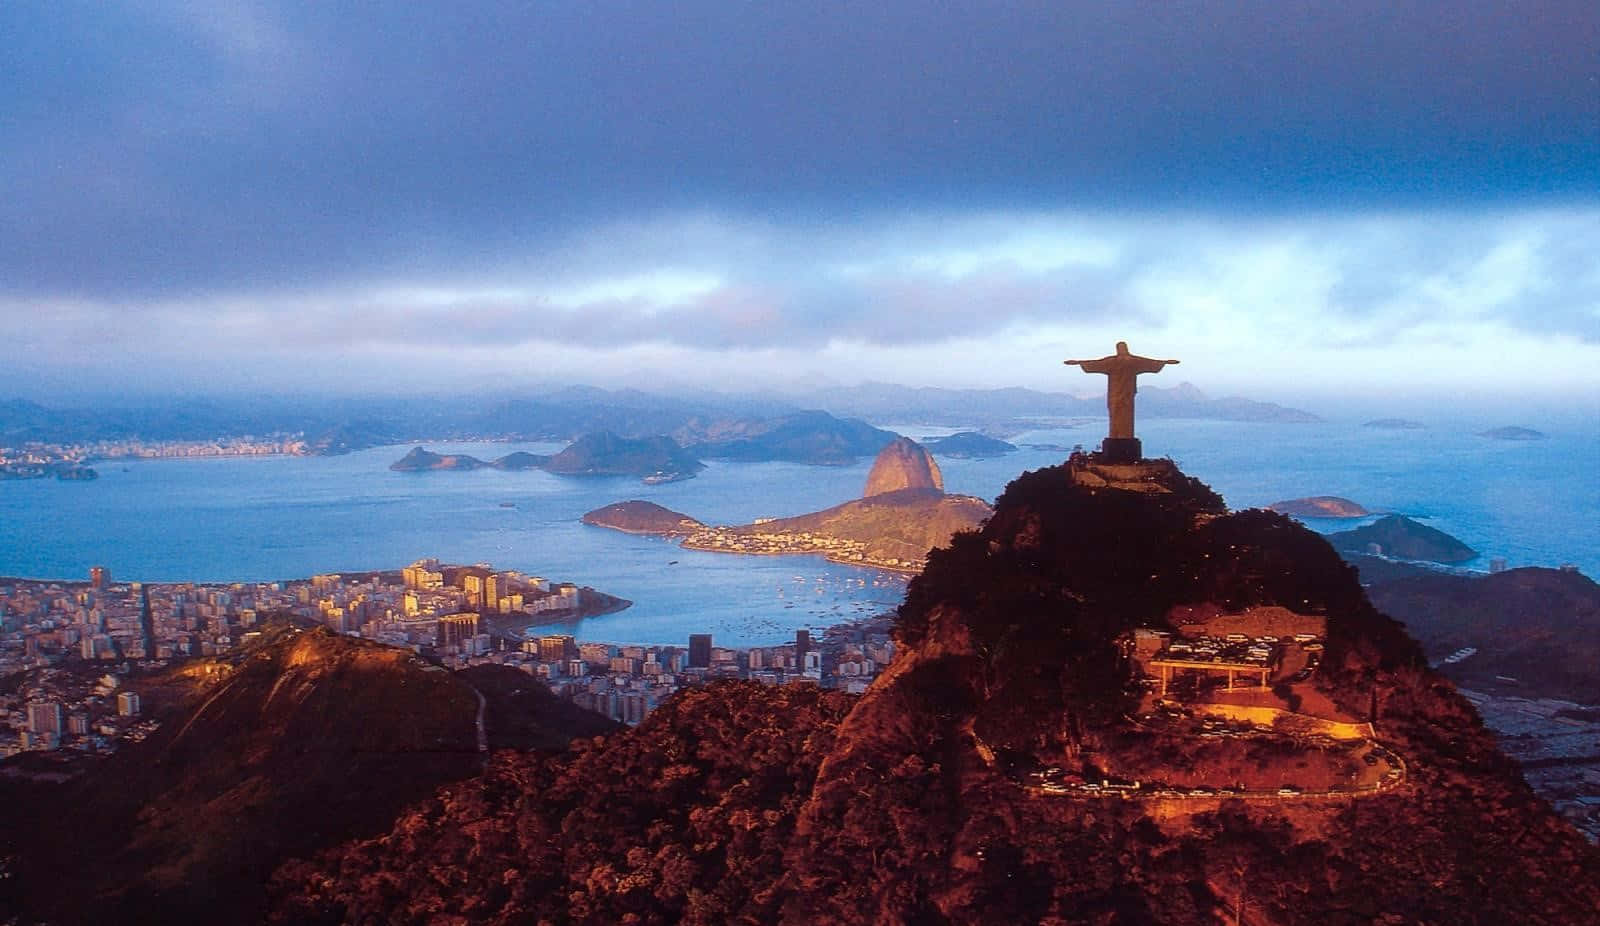 Bienvenidoa Brasil. Enjoy Your Stay And Immerse Yourself In The Beauty Of The Country.